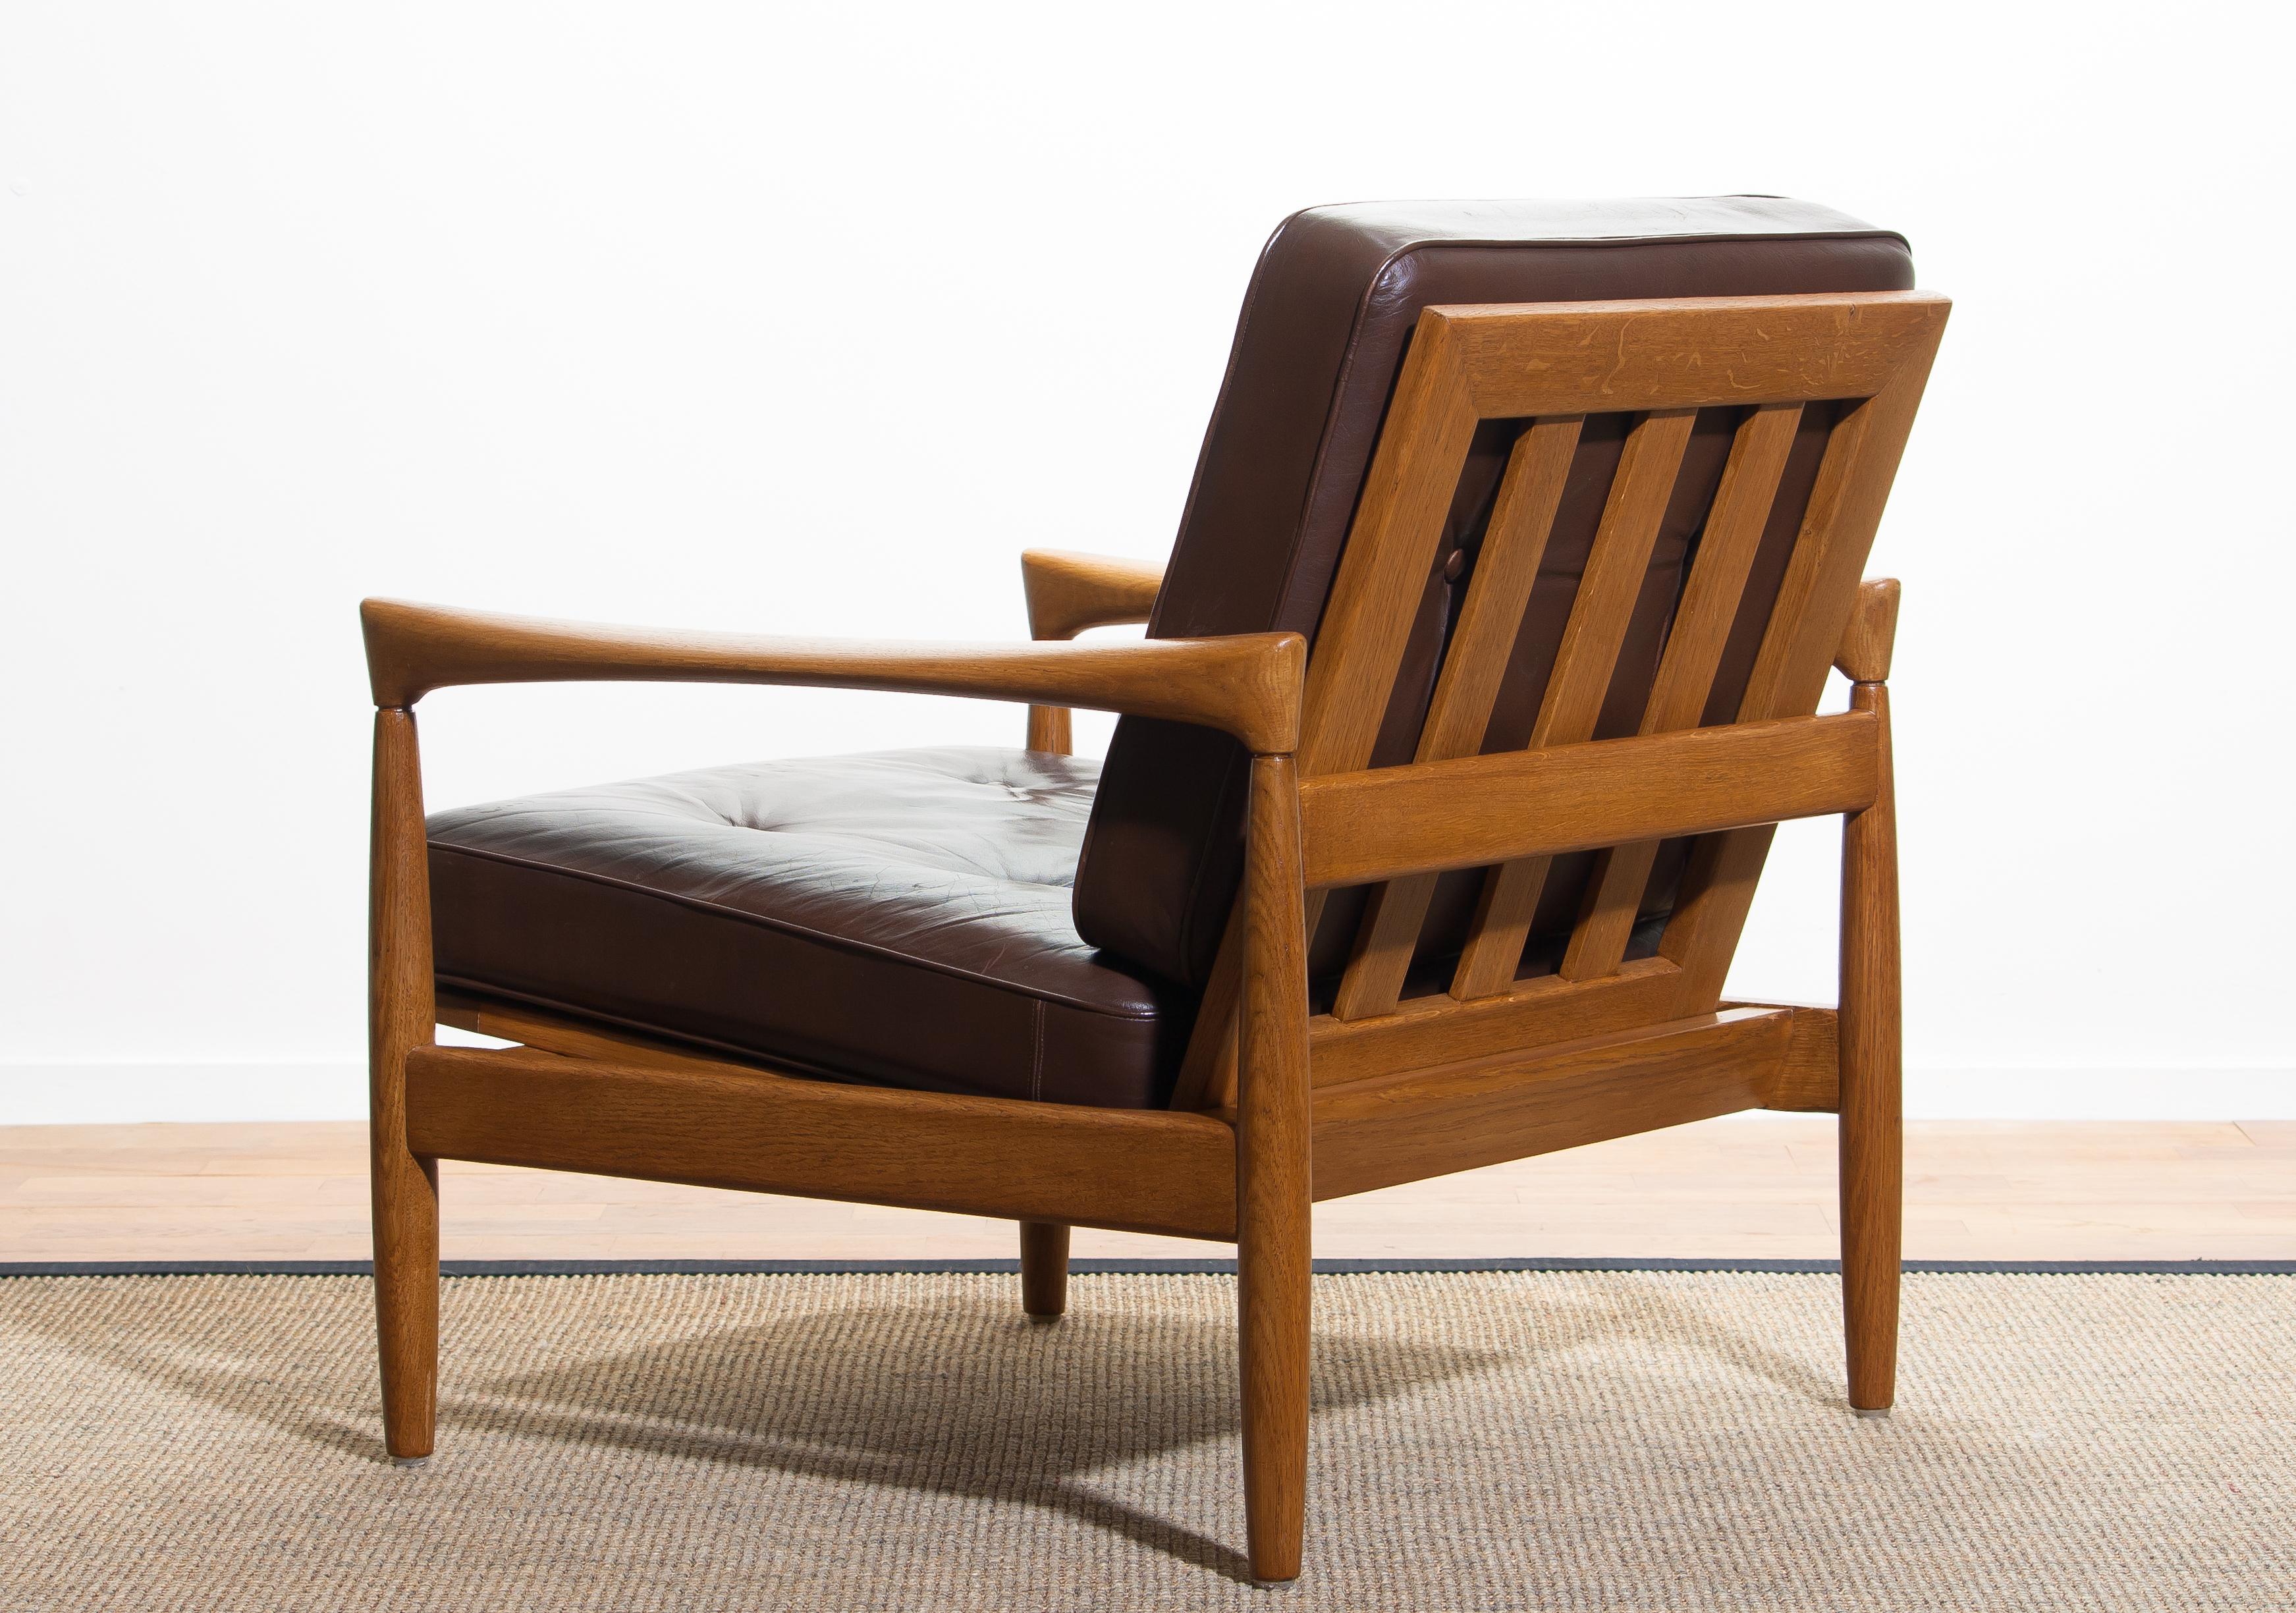 Mid-20th Century 1960s, Oak with Brown Leather Lounge Chair by Erik Wörtz for Bröderna Anderssons